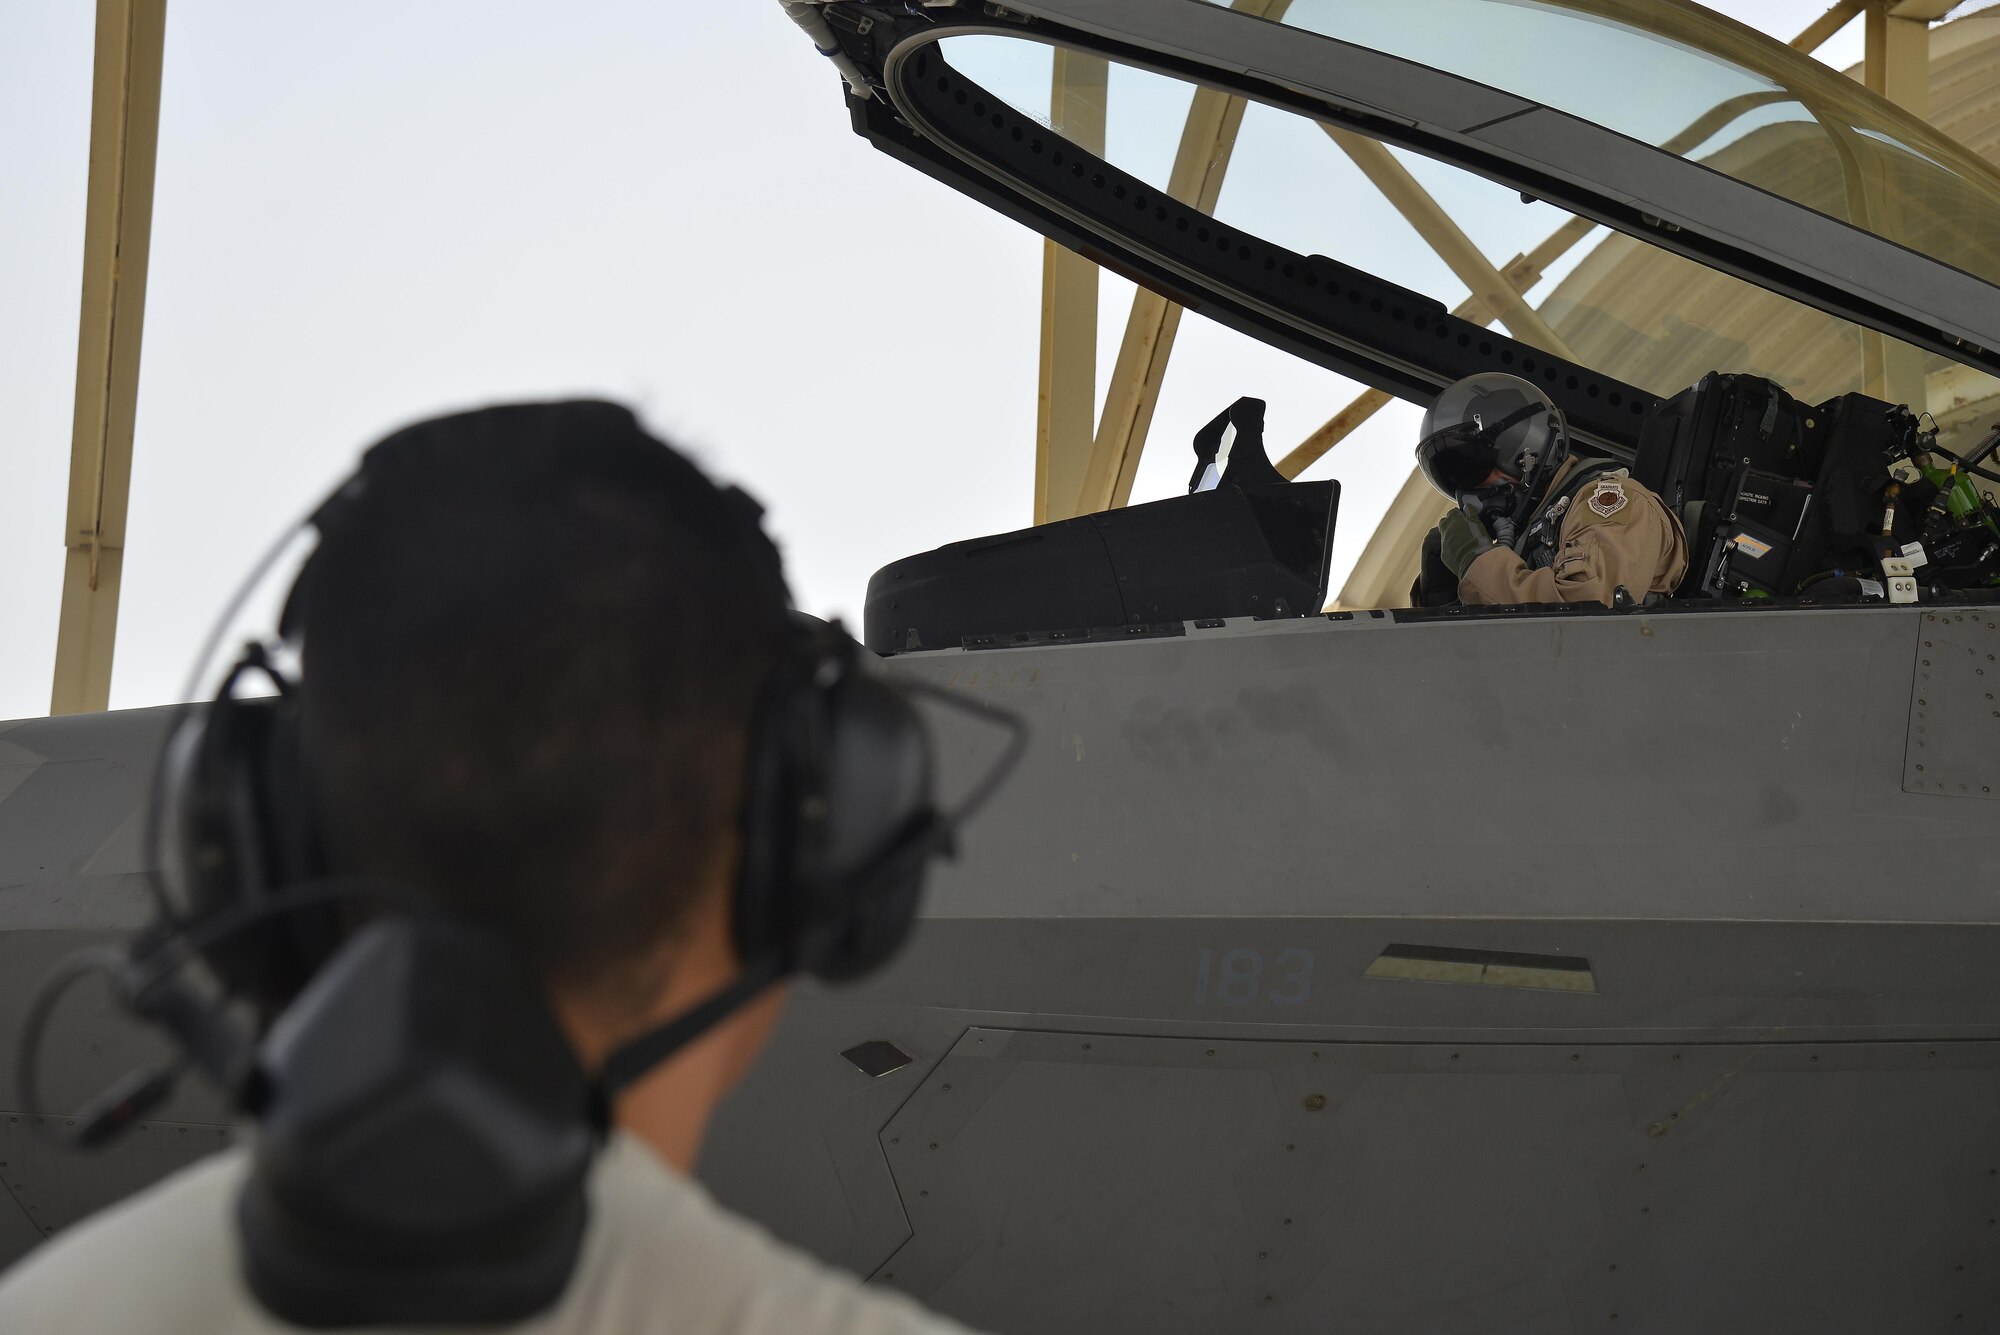 An F-22 Raptor pilot conducts prelaunch procedures at an undisclosed location in Southwest Asia July 9, 2015. The F-22’s combination of sensor capability, integrated avionics, situational awareness, and weapons provides first-kill opportunity against threats. (U.S. Air Force photo/Tech. Sgt. Christopher Boitz)